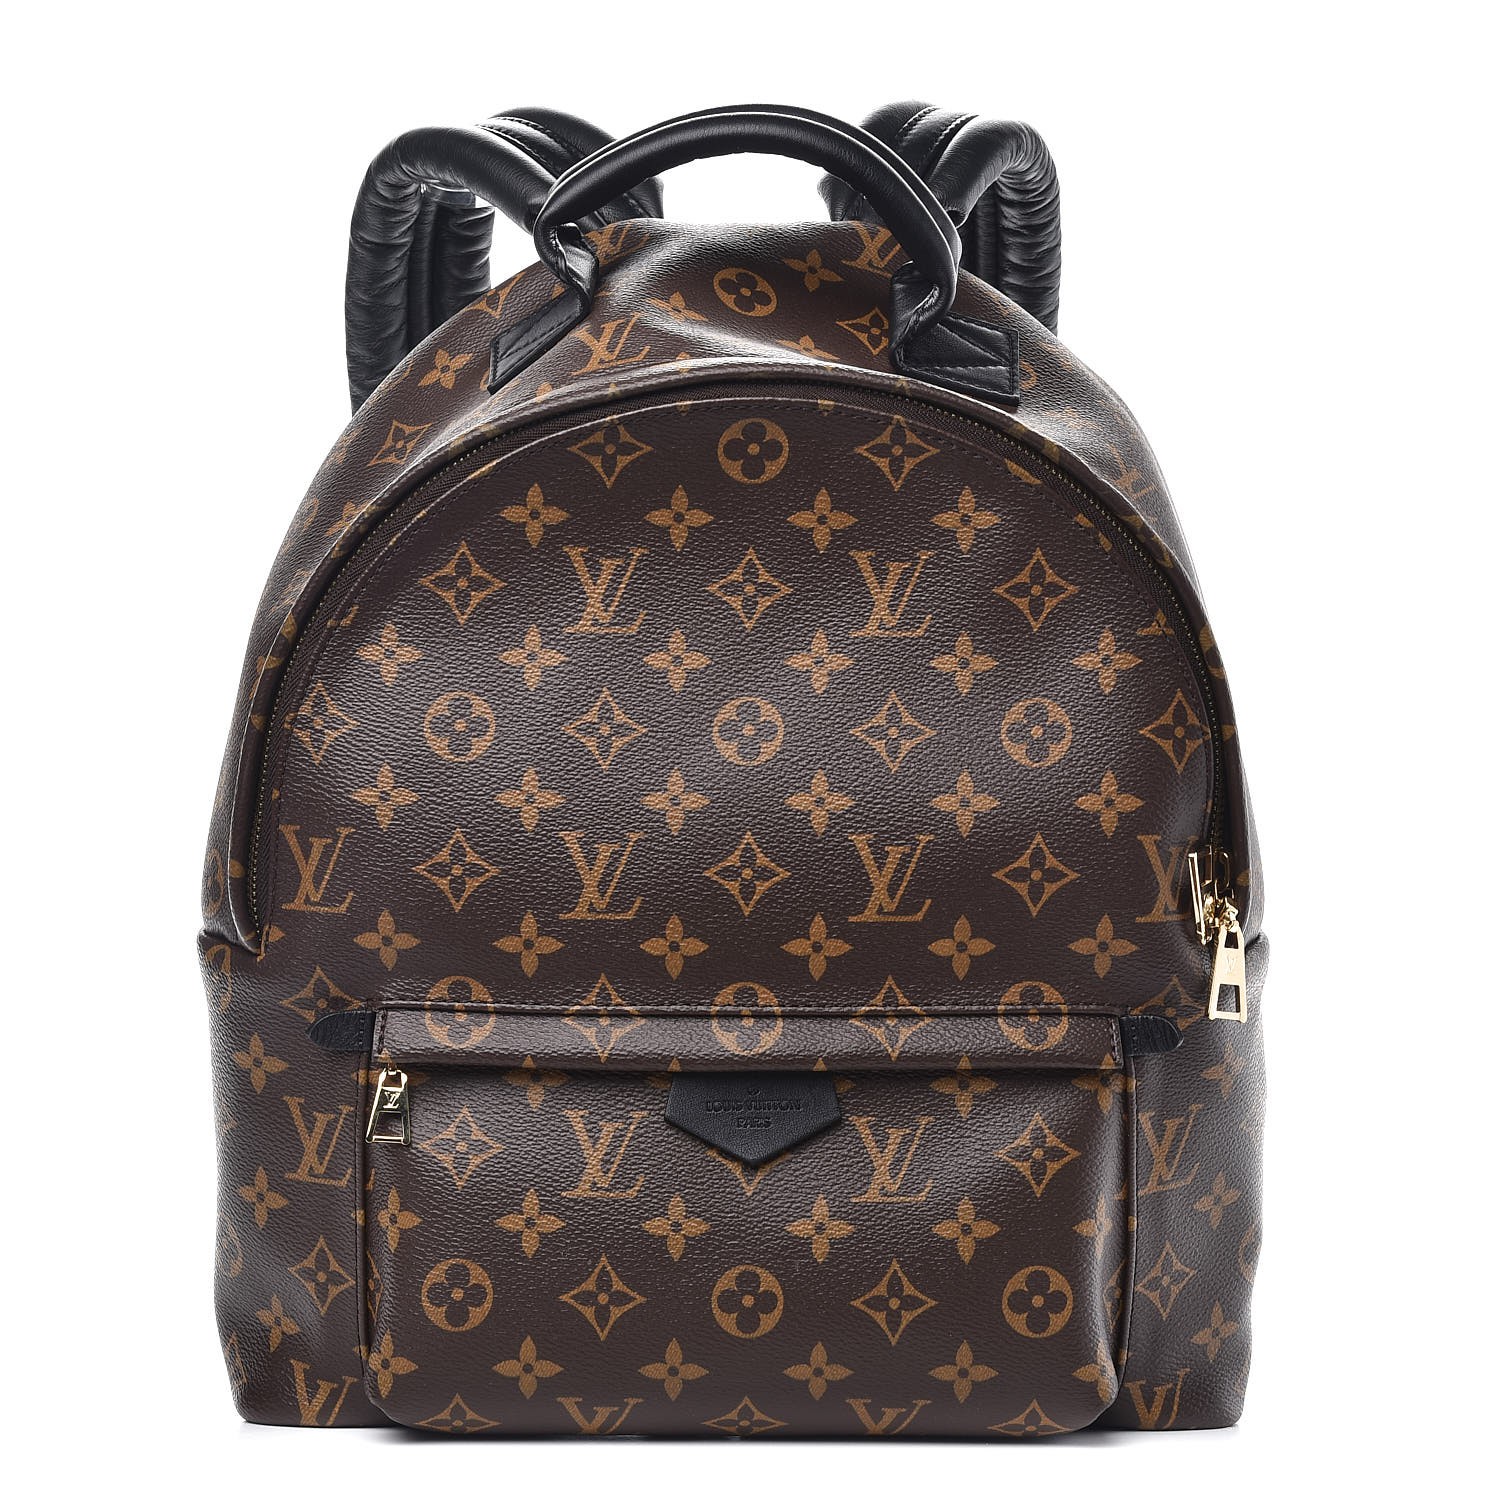 Are Louis Vuitton Backpacks Worth It Absolutely | semashow.com